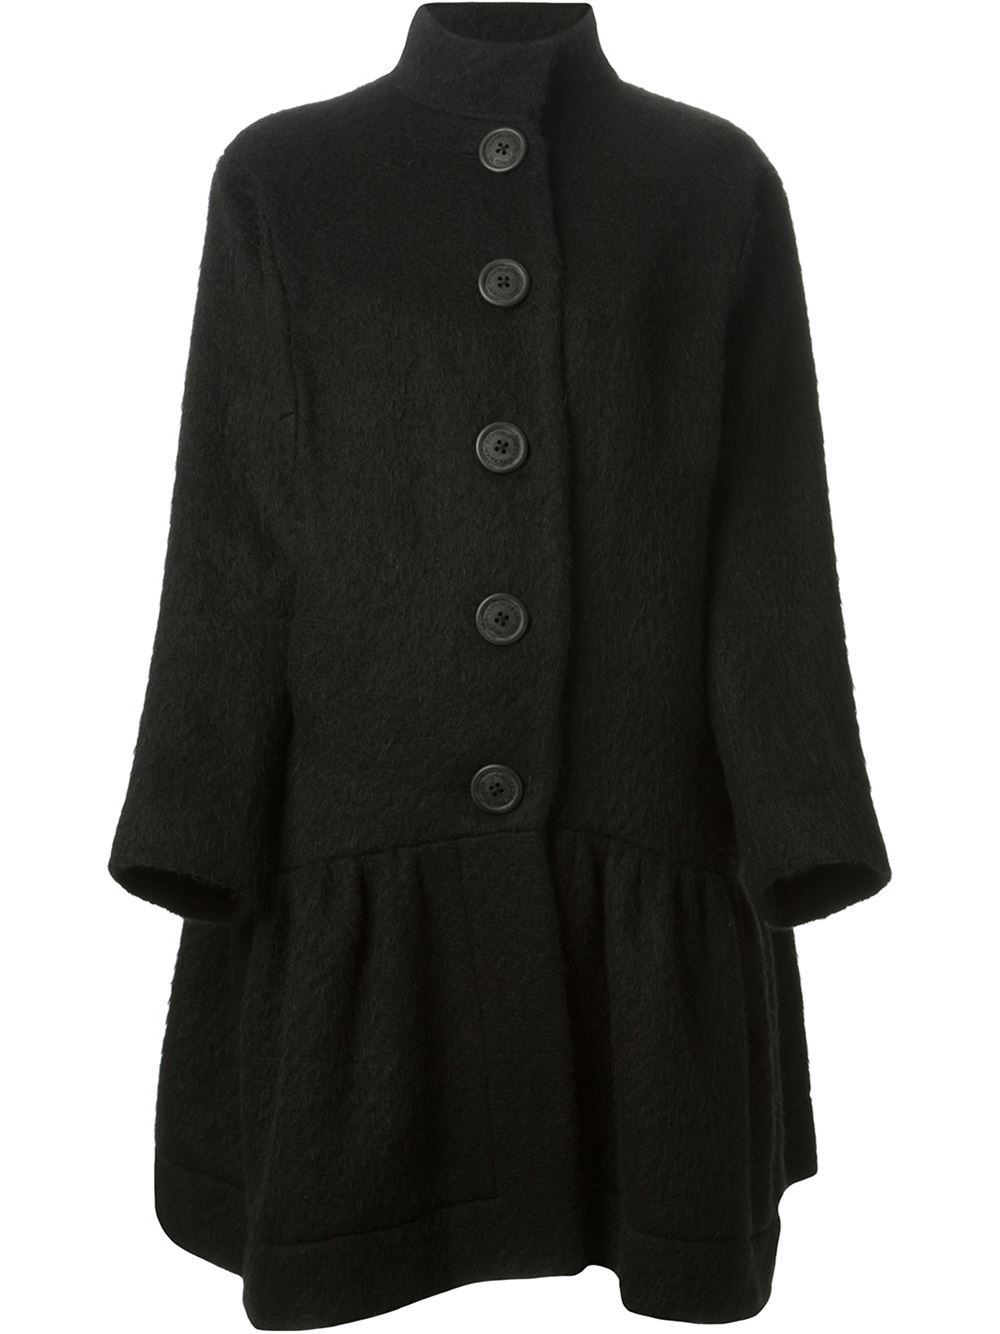 Vivienne Westwood Anglomania 'Nymph' Coat in Black | Lyst